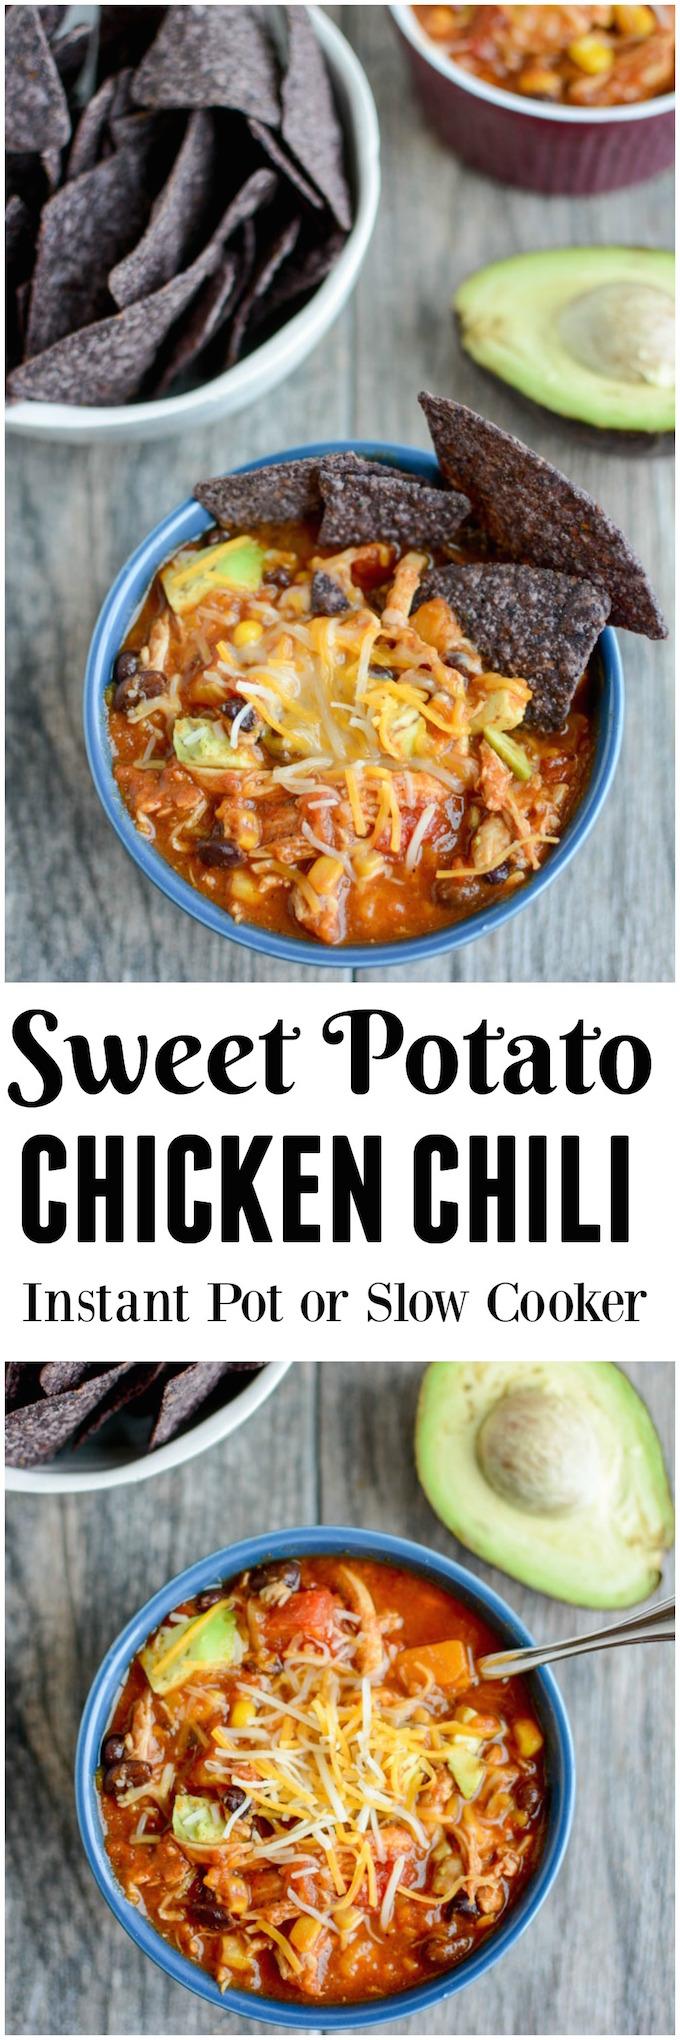 This chicken chili with sweet potato can be made in the instant pot or slow cooker for an easy and healthy dinner.  And leftovers make the perfect packable lunch. 